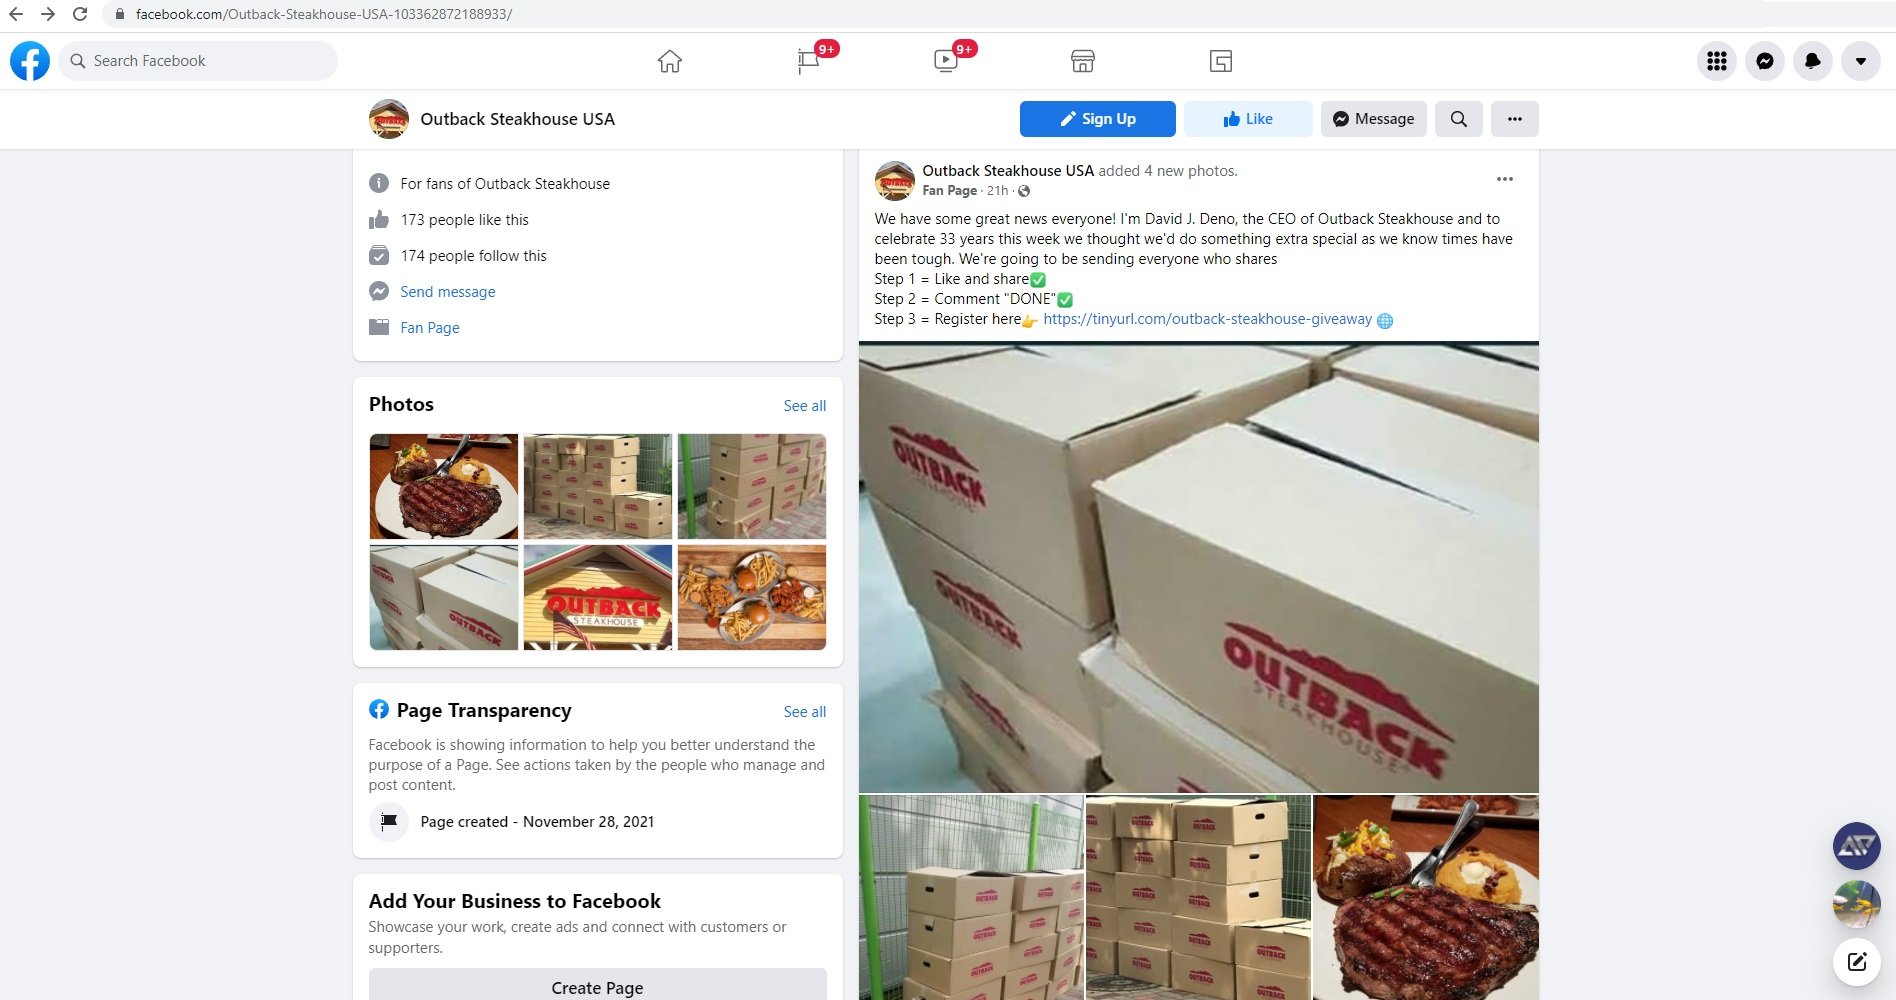 The Outback Steakhouse Giveaway Facebook Scam